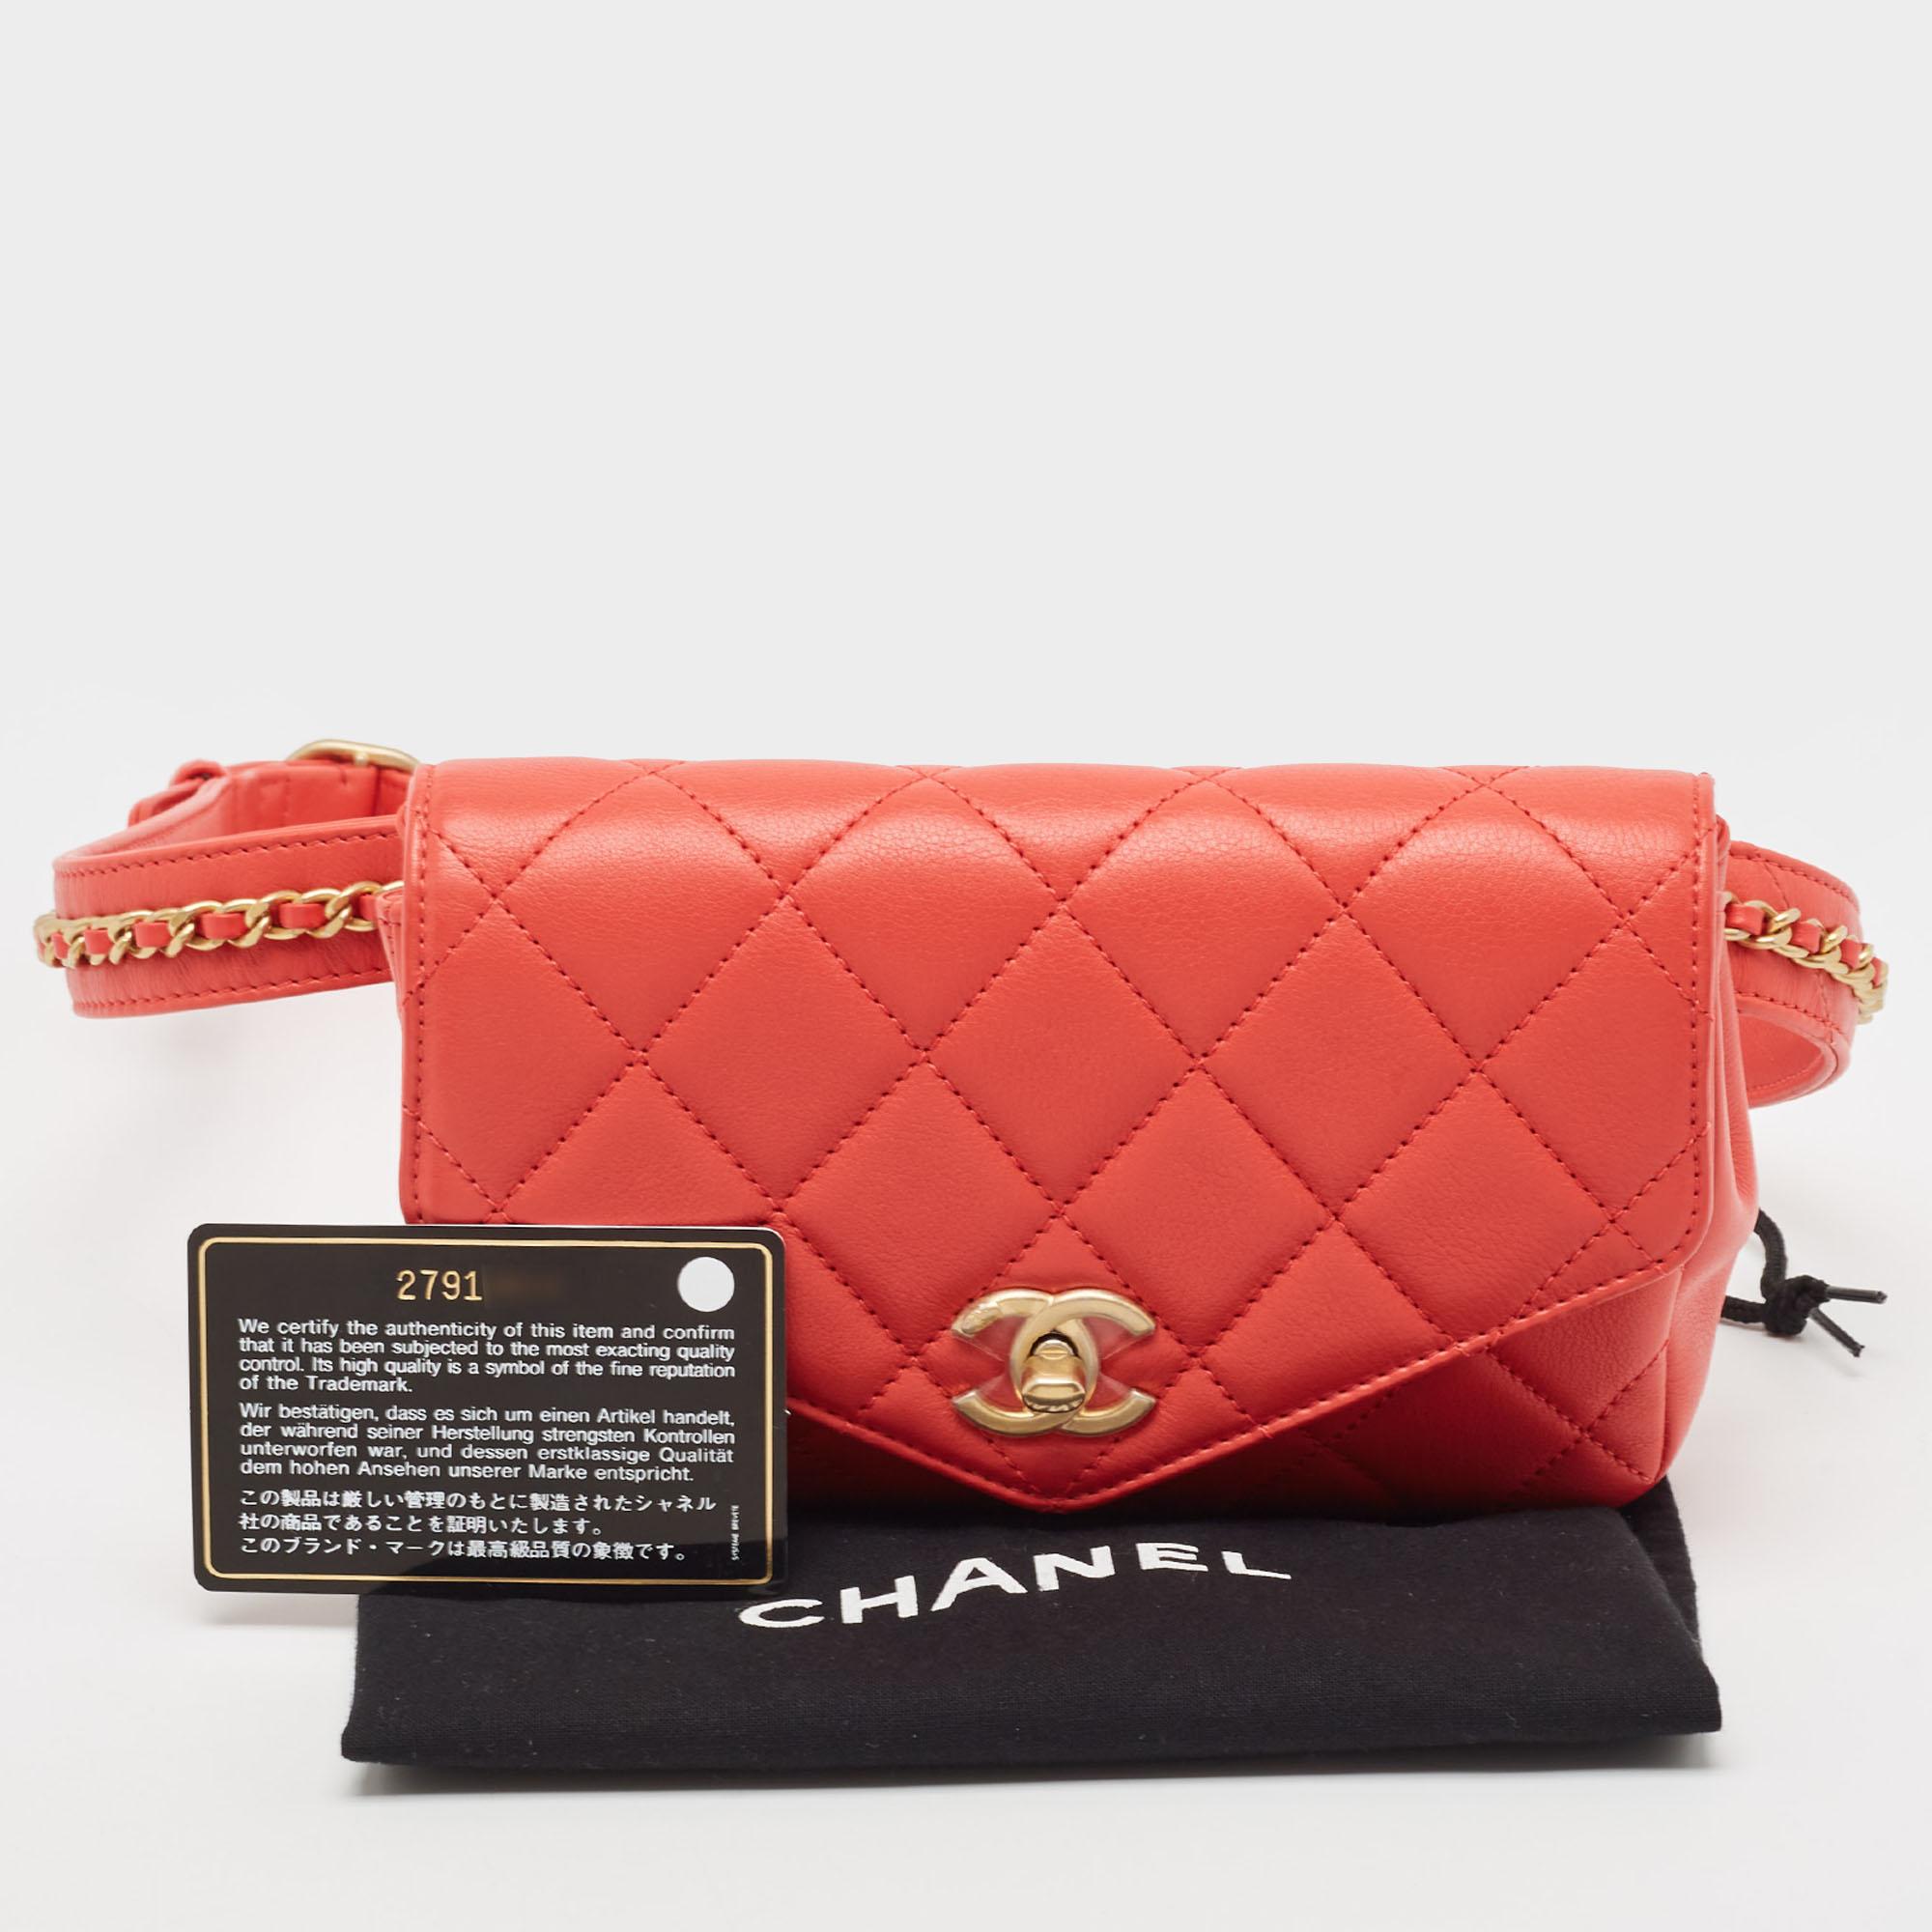 Chanel Red Quilted Leather CC Waist Belt Bag 6